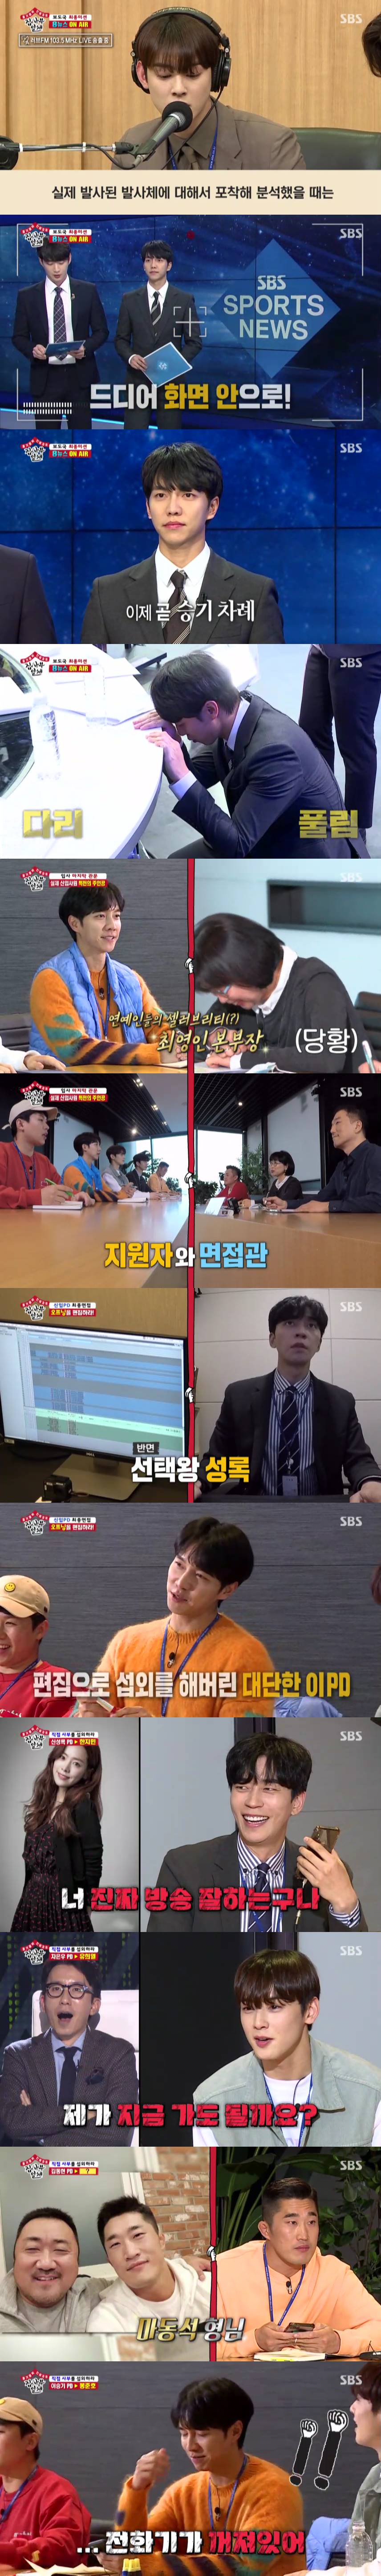 SBS All The Butlers Lee Seung-gi was skilled, and Cha Eun-woo was hired as a career PD and new employee with unlimited growth potential.SBS All The Butlers, which was broadcast on April 26 (Sun), was decorated with Broadcast Station 24 oclock special feature, and Lee Seung-gi, Shin Sung-rok, Yang Se-hyeong, Cha Eun-woo and Kim Dong-Hyun were shown trying to experience the broadcasting station.Lee Seung-gi challenged the SBS 8 News sports news. Kim Yoon-sang said, The prompter may be turned off today.I have to be careful like that. He made Lee Seung-gi nervous.In fact, Lee Seung-gi was preparing for Live broadcast on the day, and the news order was changed on the spot because of the breaking news that the opening day of the Tokyo Olympics was confirmed.Lee Seung-gi, who seemed nervous, repeated his practice until just before Live broadcast, and he was perfectly impressed by Re-Ment as if he was nervous.Cha Eun-woo, who was in charge of radio news broadcasts, also calmly finished radio broadcasts.The interviewees included Choi Young-in, head of the entertainment division, Park Sung-hoon CP, and Kwak Seung-young CP.The first task of the final interview was editing the opening video of All The Butlers.Lee Seung-gi was difficult to cut Choices, while Shin Sung-rok, a sincere, boldly cut Choices and continued editing at a rapid pace.Yang Se-hyeong edited the video by evaluating his Re-Ment, while Cha Eun-woo and Kim Dong-Hyun continued editing self-centeredly.Before the release of the video, Park Sung-hoon CP said, There is no correct answer, but there is a wrong answer. Then, five members editorial videos were released.First, the self-centered Cha Eun-woo video was released, and Kwak Seung-young, CP, said, The theme consciousness is excellent.I did not see anything except Cha Eun-woo Lee Seung-gi, in the meantime, made me laugh at interviewers by creating a scene where Cha Eun-woo wants to fix All The Butlers with Devils Editing.After watching the video, Choi Young-in, director of the entertainment division, explained the purpose of the project, saying, I wanted to let you know that it takes a lot of time and effort to edit a short time.The second task was to direct the master. Choe Yeong, general manager, said, We are meeting each others needs.We really want to think about what we need from the position of the person, he said.The members who were embarrassed by the unexpected task were mobilized to mobilize their personal connections.Shin Sung-rok called actor Han Ji-min, Cha Eun-woo called Yoo Hee-yeol, and Kim Dong-Hyun called Ma Dong-seok.They persuaded their opponents actively and enthusiastically to laugh, and they led to praise from interviewers with a convincing appearance.Lee Seung-gi contacted Bong Joon-ho, but unfortunately the phone was off; Lee Seung-gi, however, left a clear and coherent voice message and caught his eye.Yang Se-hyeong called Baek Jong-won, who is appearing on SBS Maman Square together.Yang Se-hyeong persuaded Baek Jong-won, saying, I called the SBS intern Yang Se-hyeong PD, not the handmade Yang Se-hyeong.What am I? Baek Jong-won said to the continued persuasion of Yang Se-hyeong, I can not say Do not laugh when you talk like this.I think its a good idea, so lets worry about it. He also invited the members to his house.This scene, in which Yang Se-hyeong spoke with Baek Jong-won for the masters appointment, gave both pleasure and anticipation and won the best one minute with a 6.5% audience rating per minute.Finally, the final results were announced: Mr. Lee Seung-gi was the most experienced, and Mr. Cha Eun-woo grew up in a short period of time, said Choe Yeong, general manager.He said, I saw the possibility of growth, he said, The skill is also very important, and Lee Seung-gi said he would hire as a career PD. Cha Eun-woo and Lee Seung-gi hugged each other and were delighted.According to Nielsen Korea, SBS All The Butlers, which was broadcast on the 26th, recorded 5.6% of household ratings and 3.2% of the 2049 target ratings, which are important indicators of the people concerned and lead the topic, (based on the second part of the metropolitan area).In addition, Yang Se-hyeong called to talk about Baek Jong-won as a master, and the highest audience rating per minute rose to 6.5% and became the best one minute.